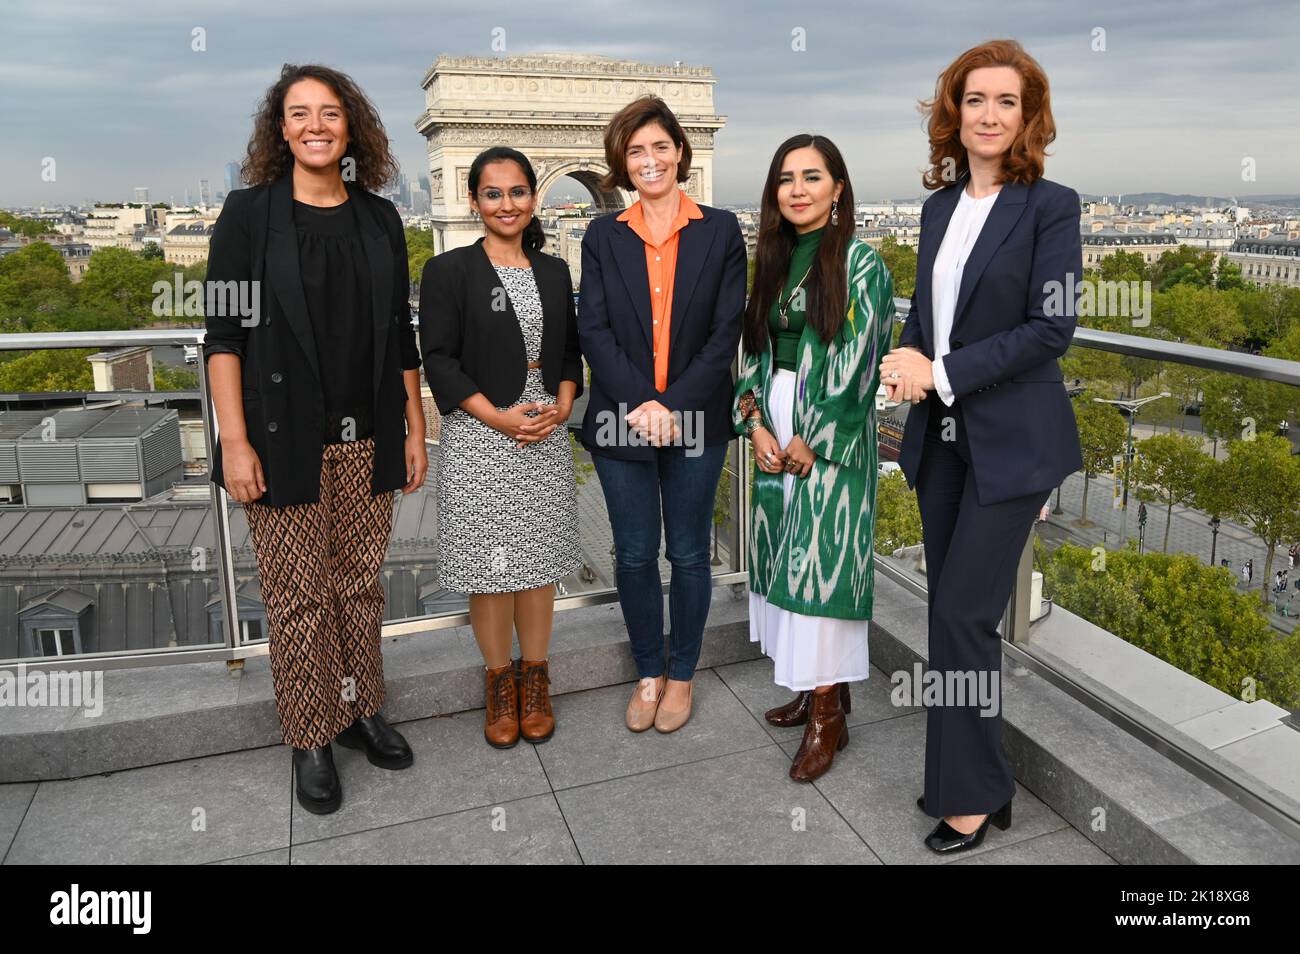 Souad Boutegrabet, CEO of Des Codeuses, Nupur Kohli, Dutch Founder and Director of NIIS Healthcare, Christel Heydemann, CEO of Orange, Nupur Kohli, Dutch Founder and Director of NIIS Healthcare and Anne-Laure de Chammard, CEO of Energy Solutions International, ENGIE, at the Women's Forum Rising Talents event in Paris, France on September 16, 2022. Photo by Laurent Zabulon/ABACAPRESS.COM Stock Photo